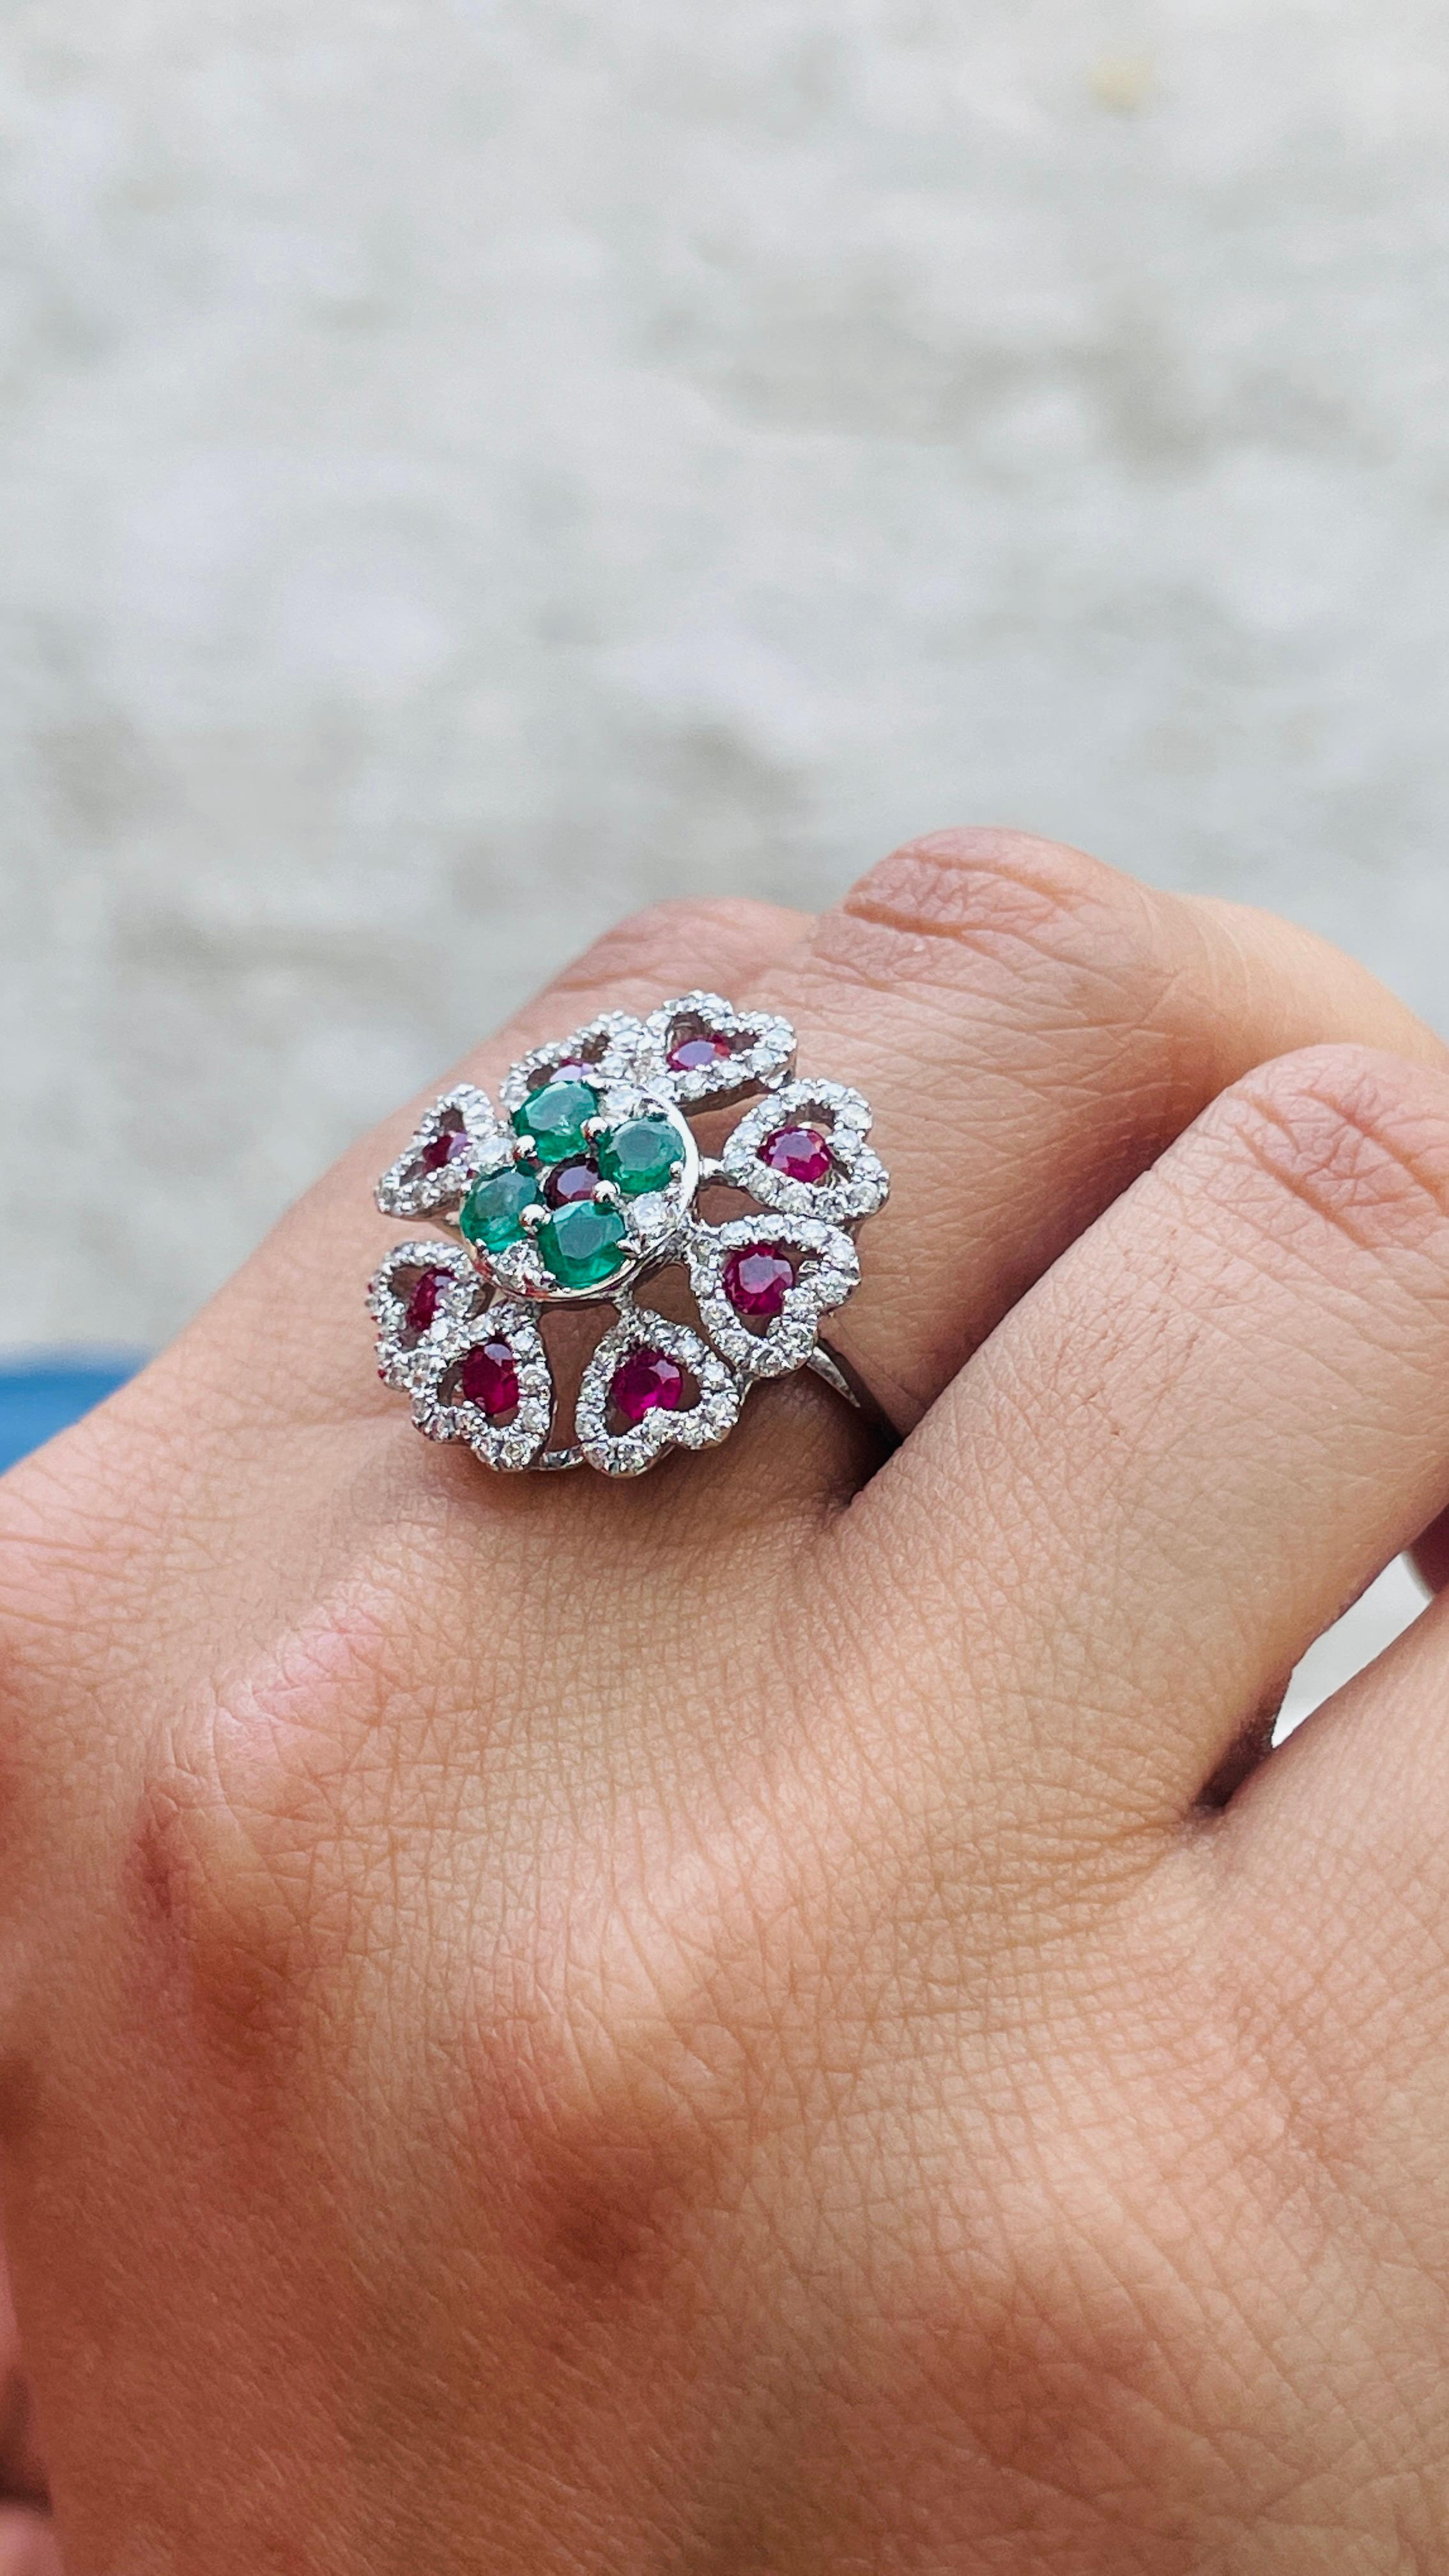 For Sale:  14K White Gold Emerald and Ruby Floral Cocktail Ring with Diamonds 5